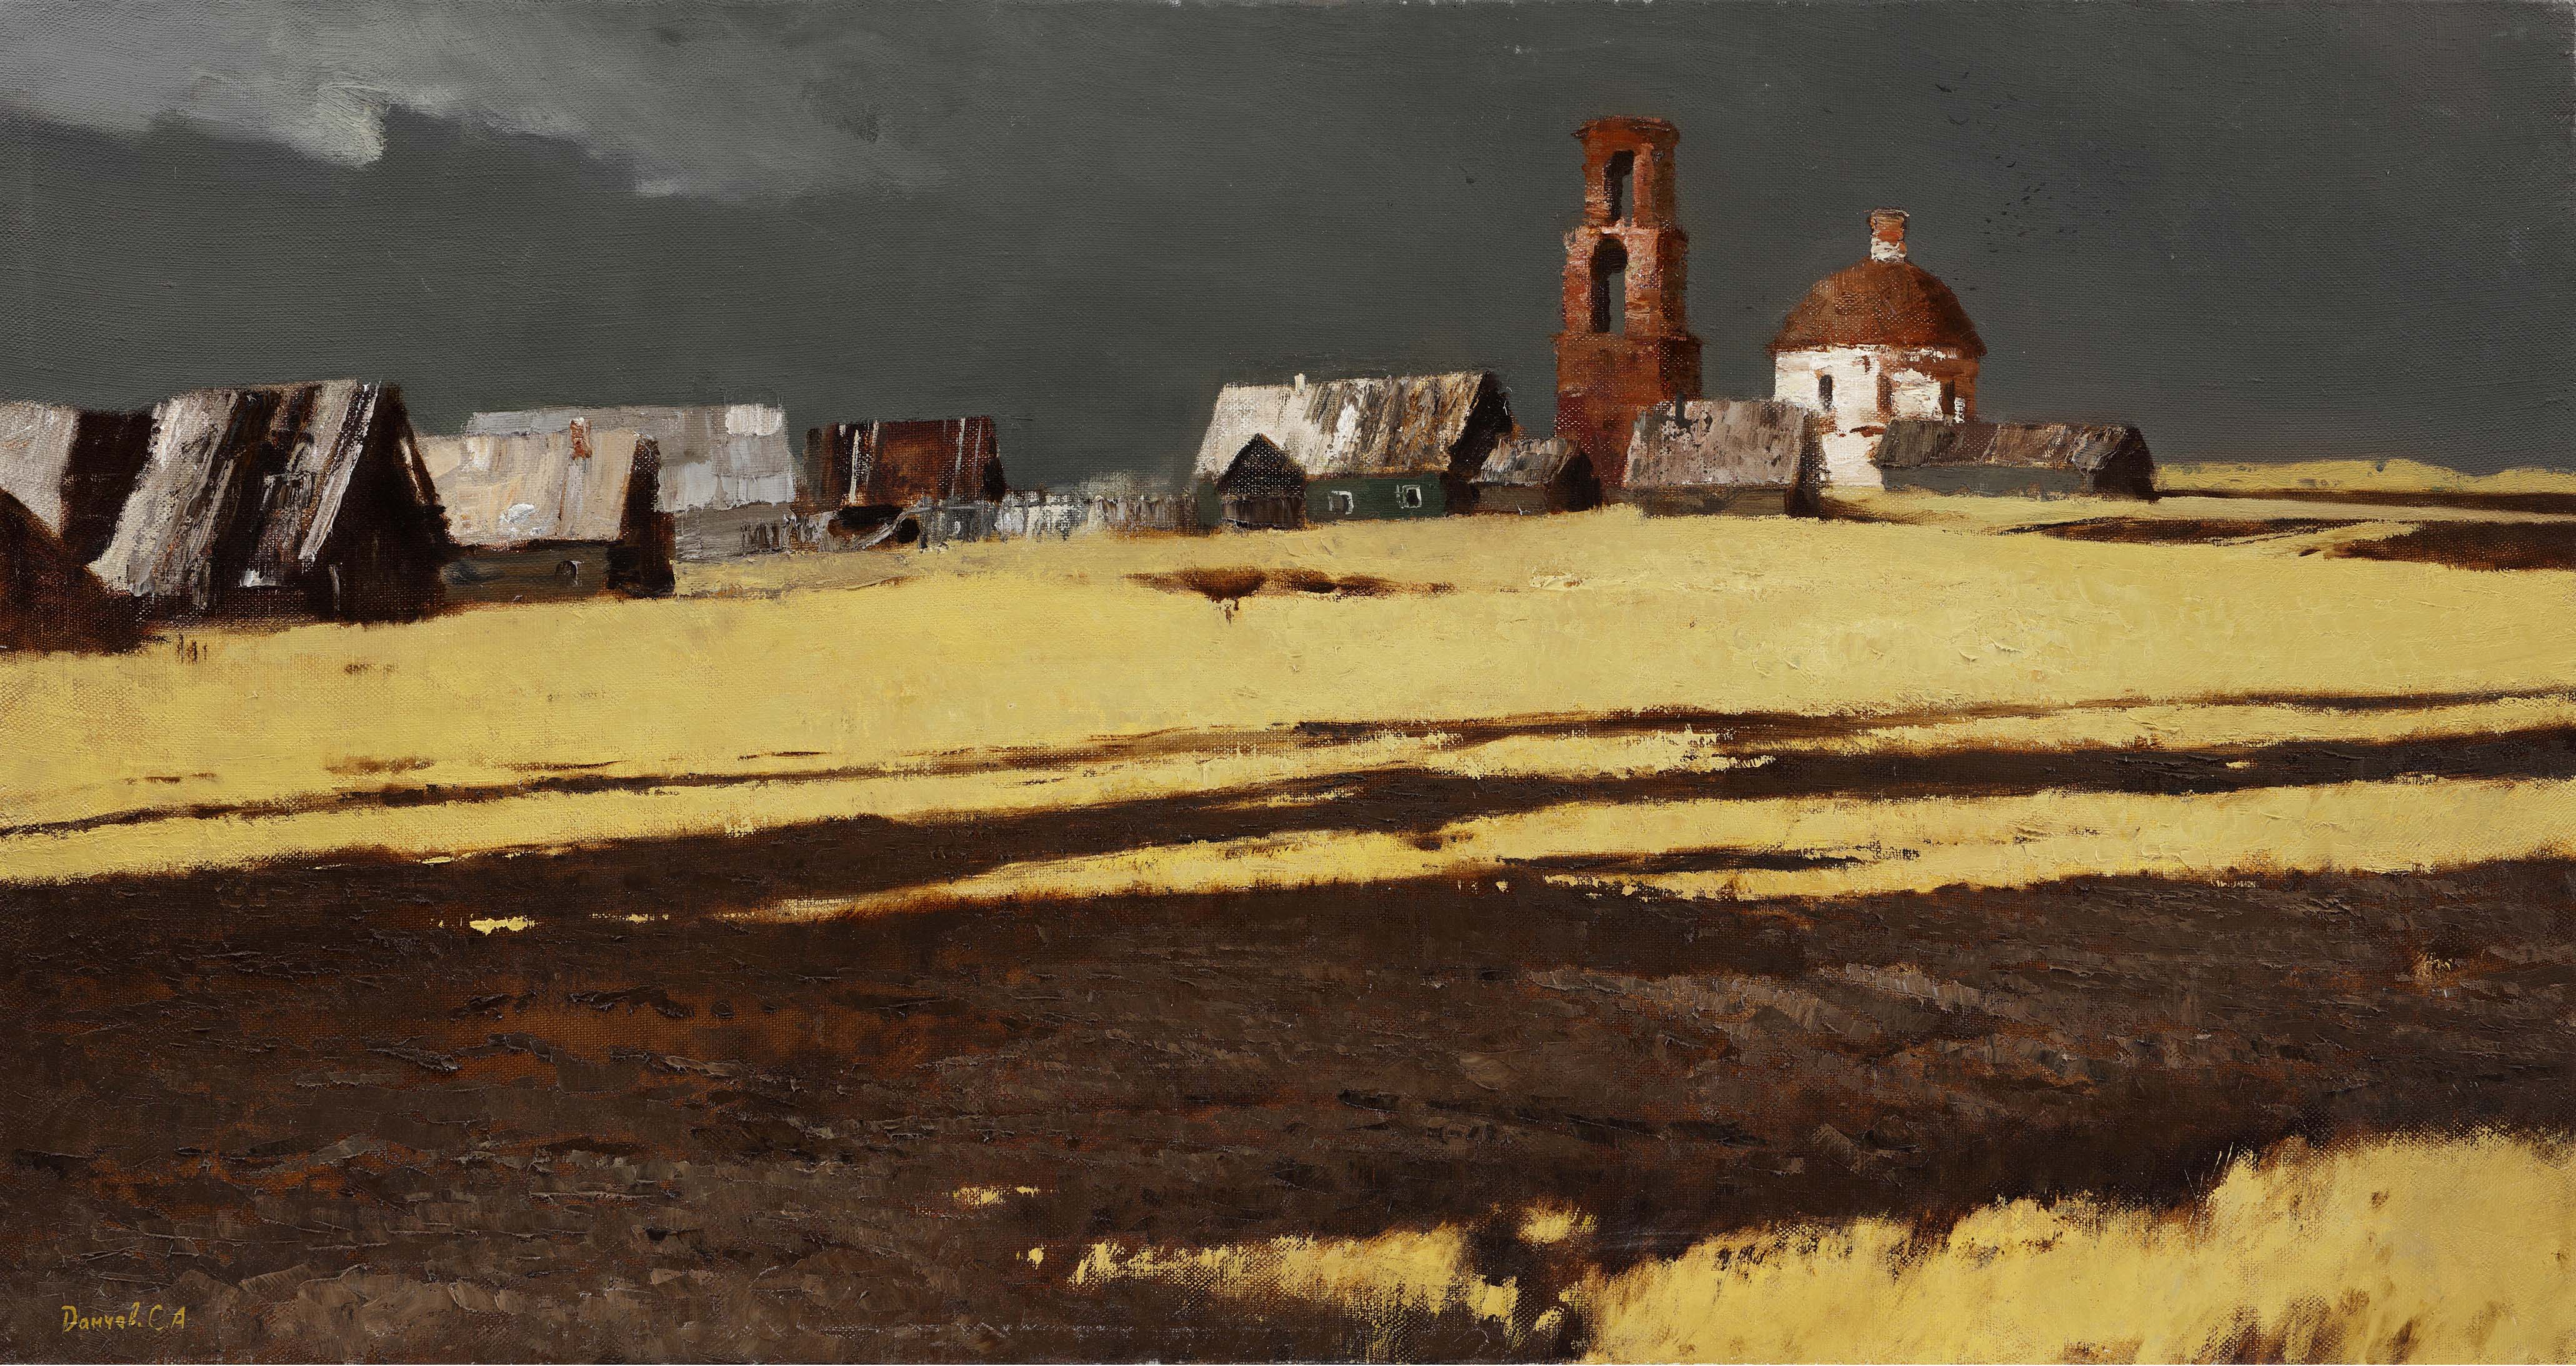 Field - 1, Sergey Danchev, Buy the painting Oil